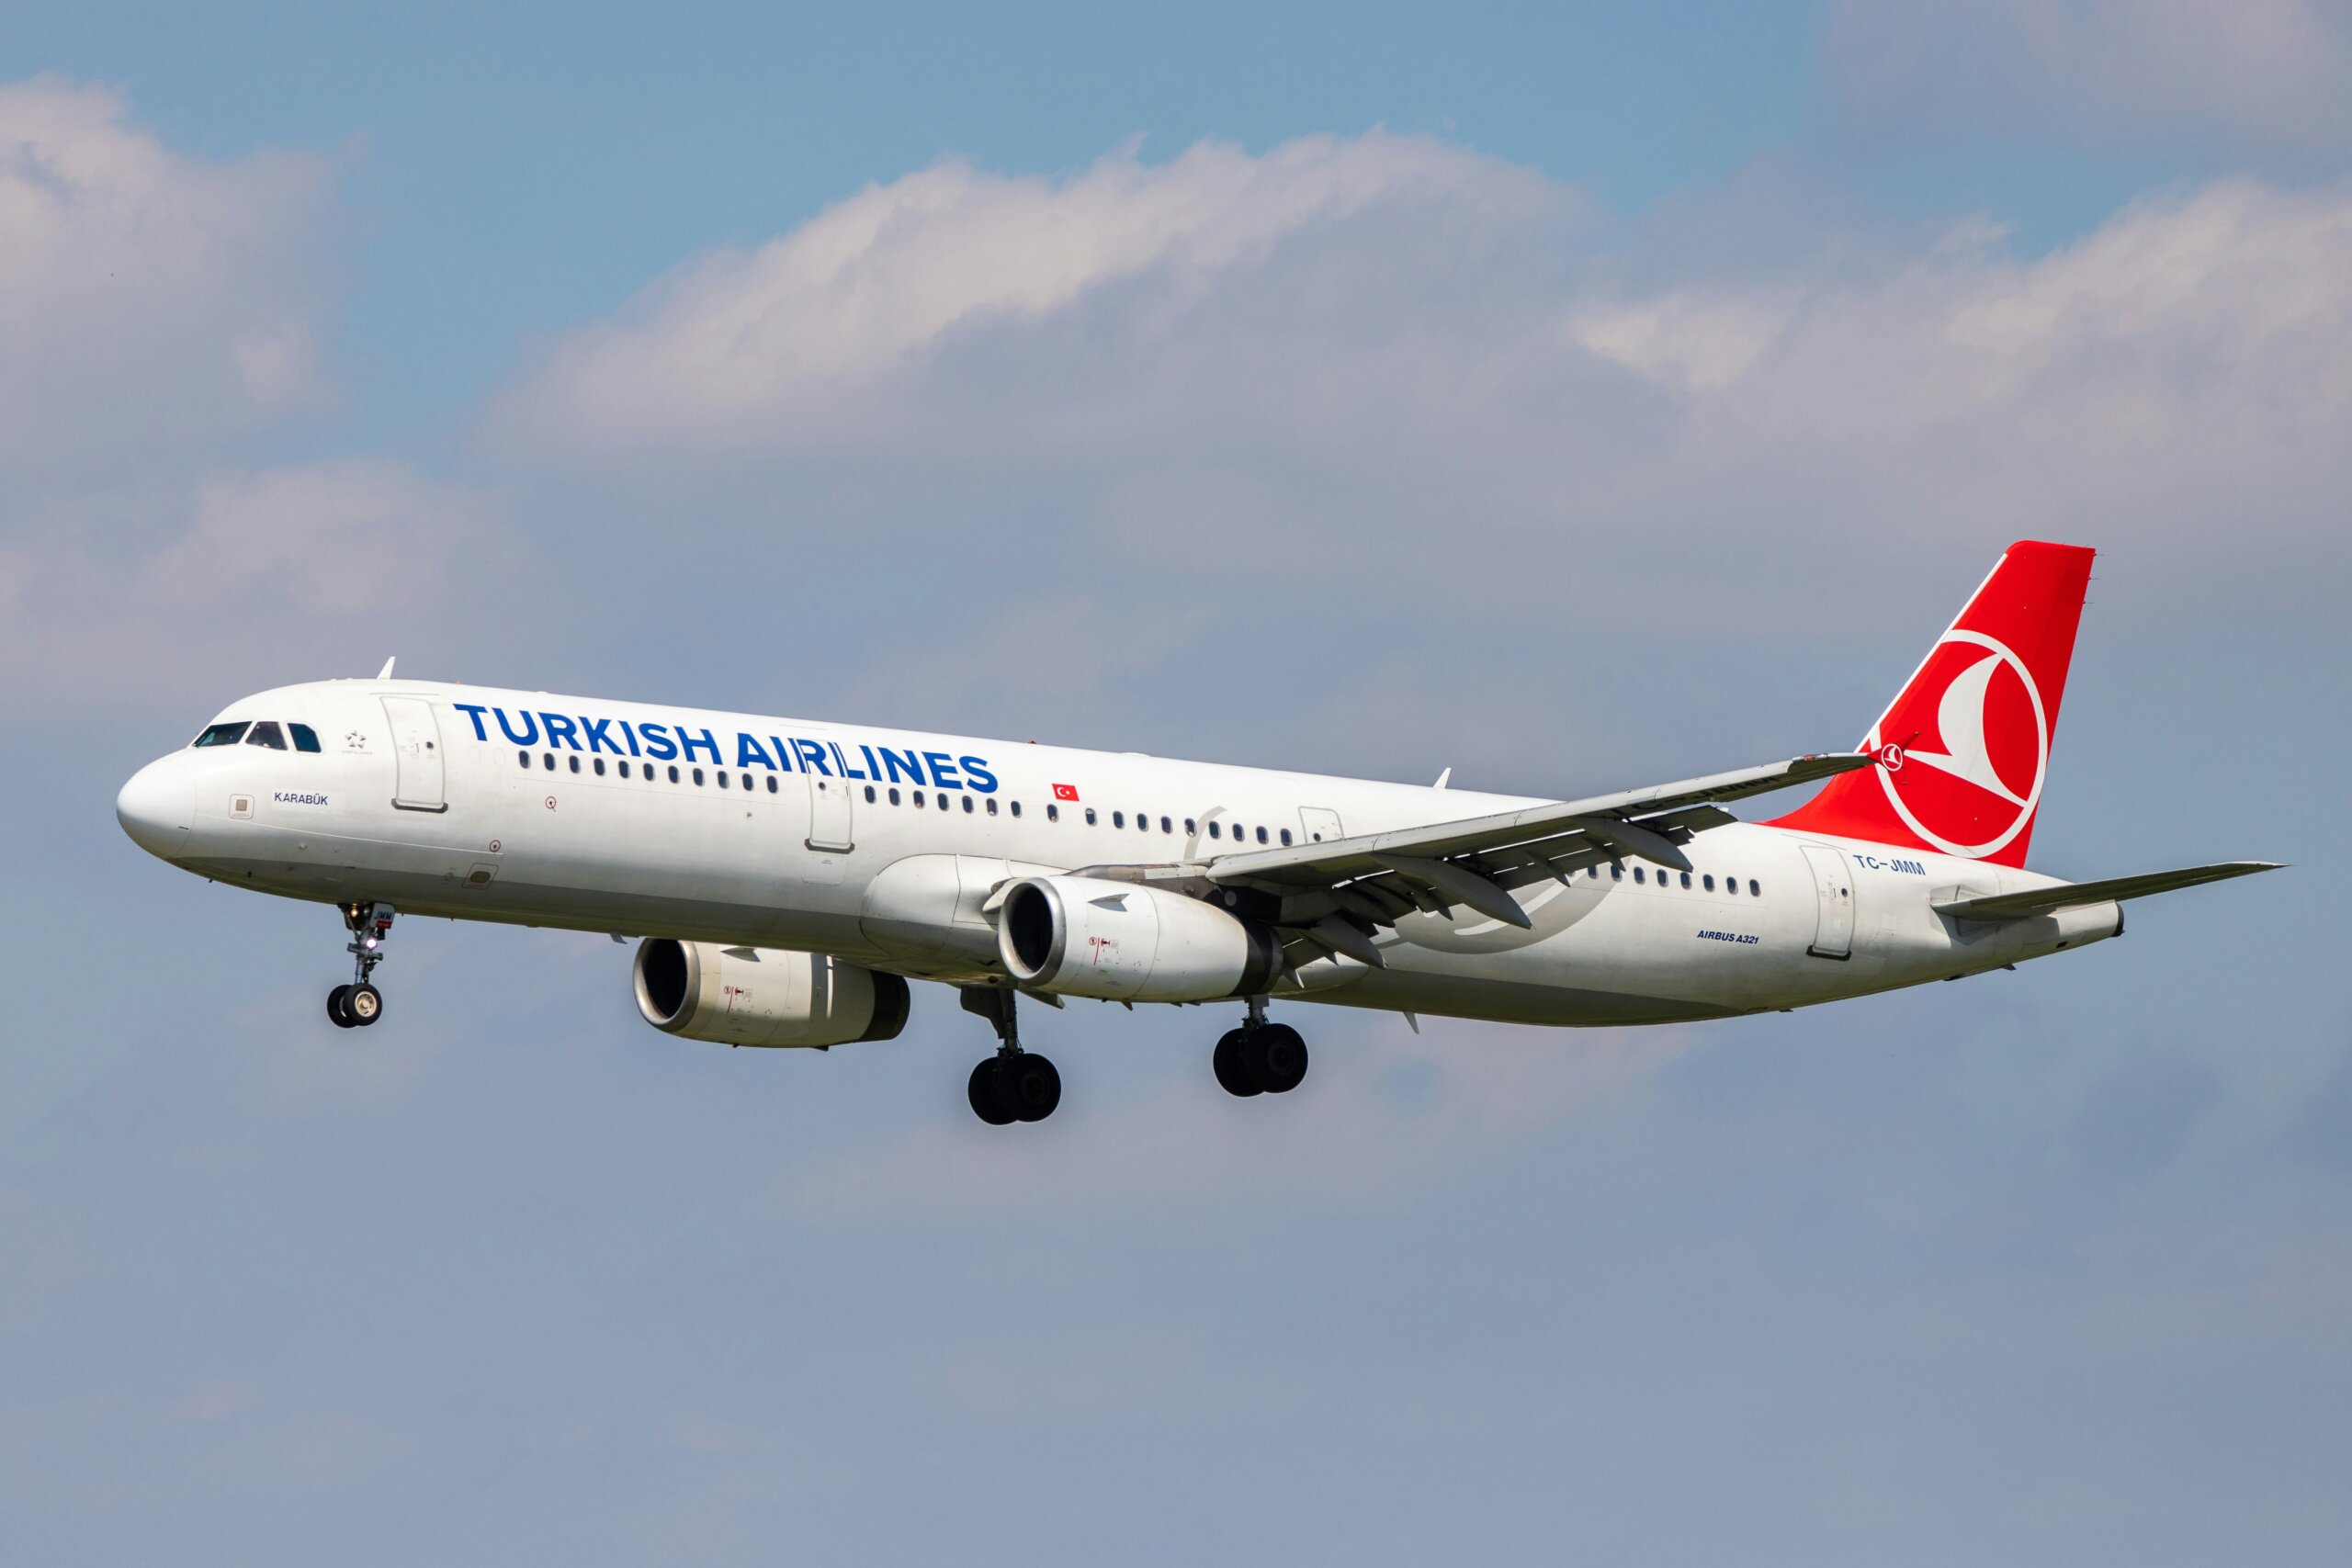 Airline in sky that says Turkish Airlines